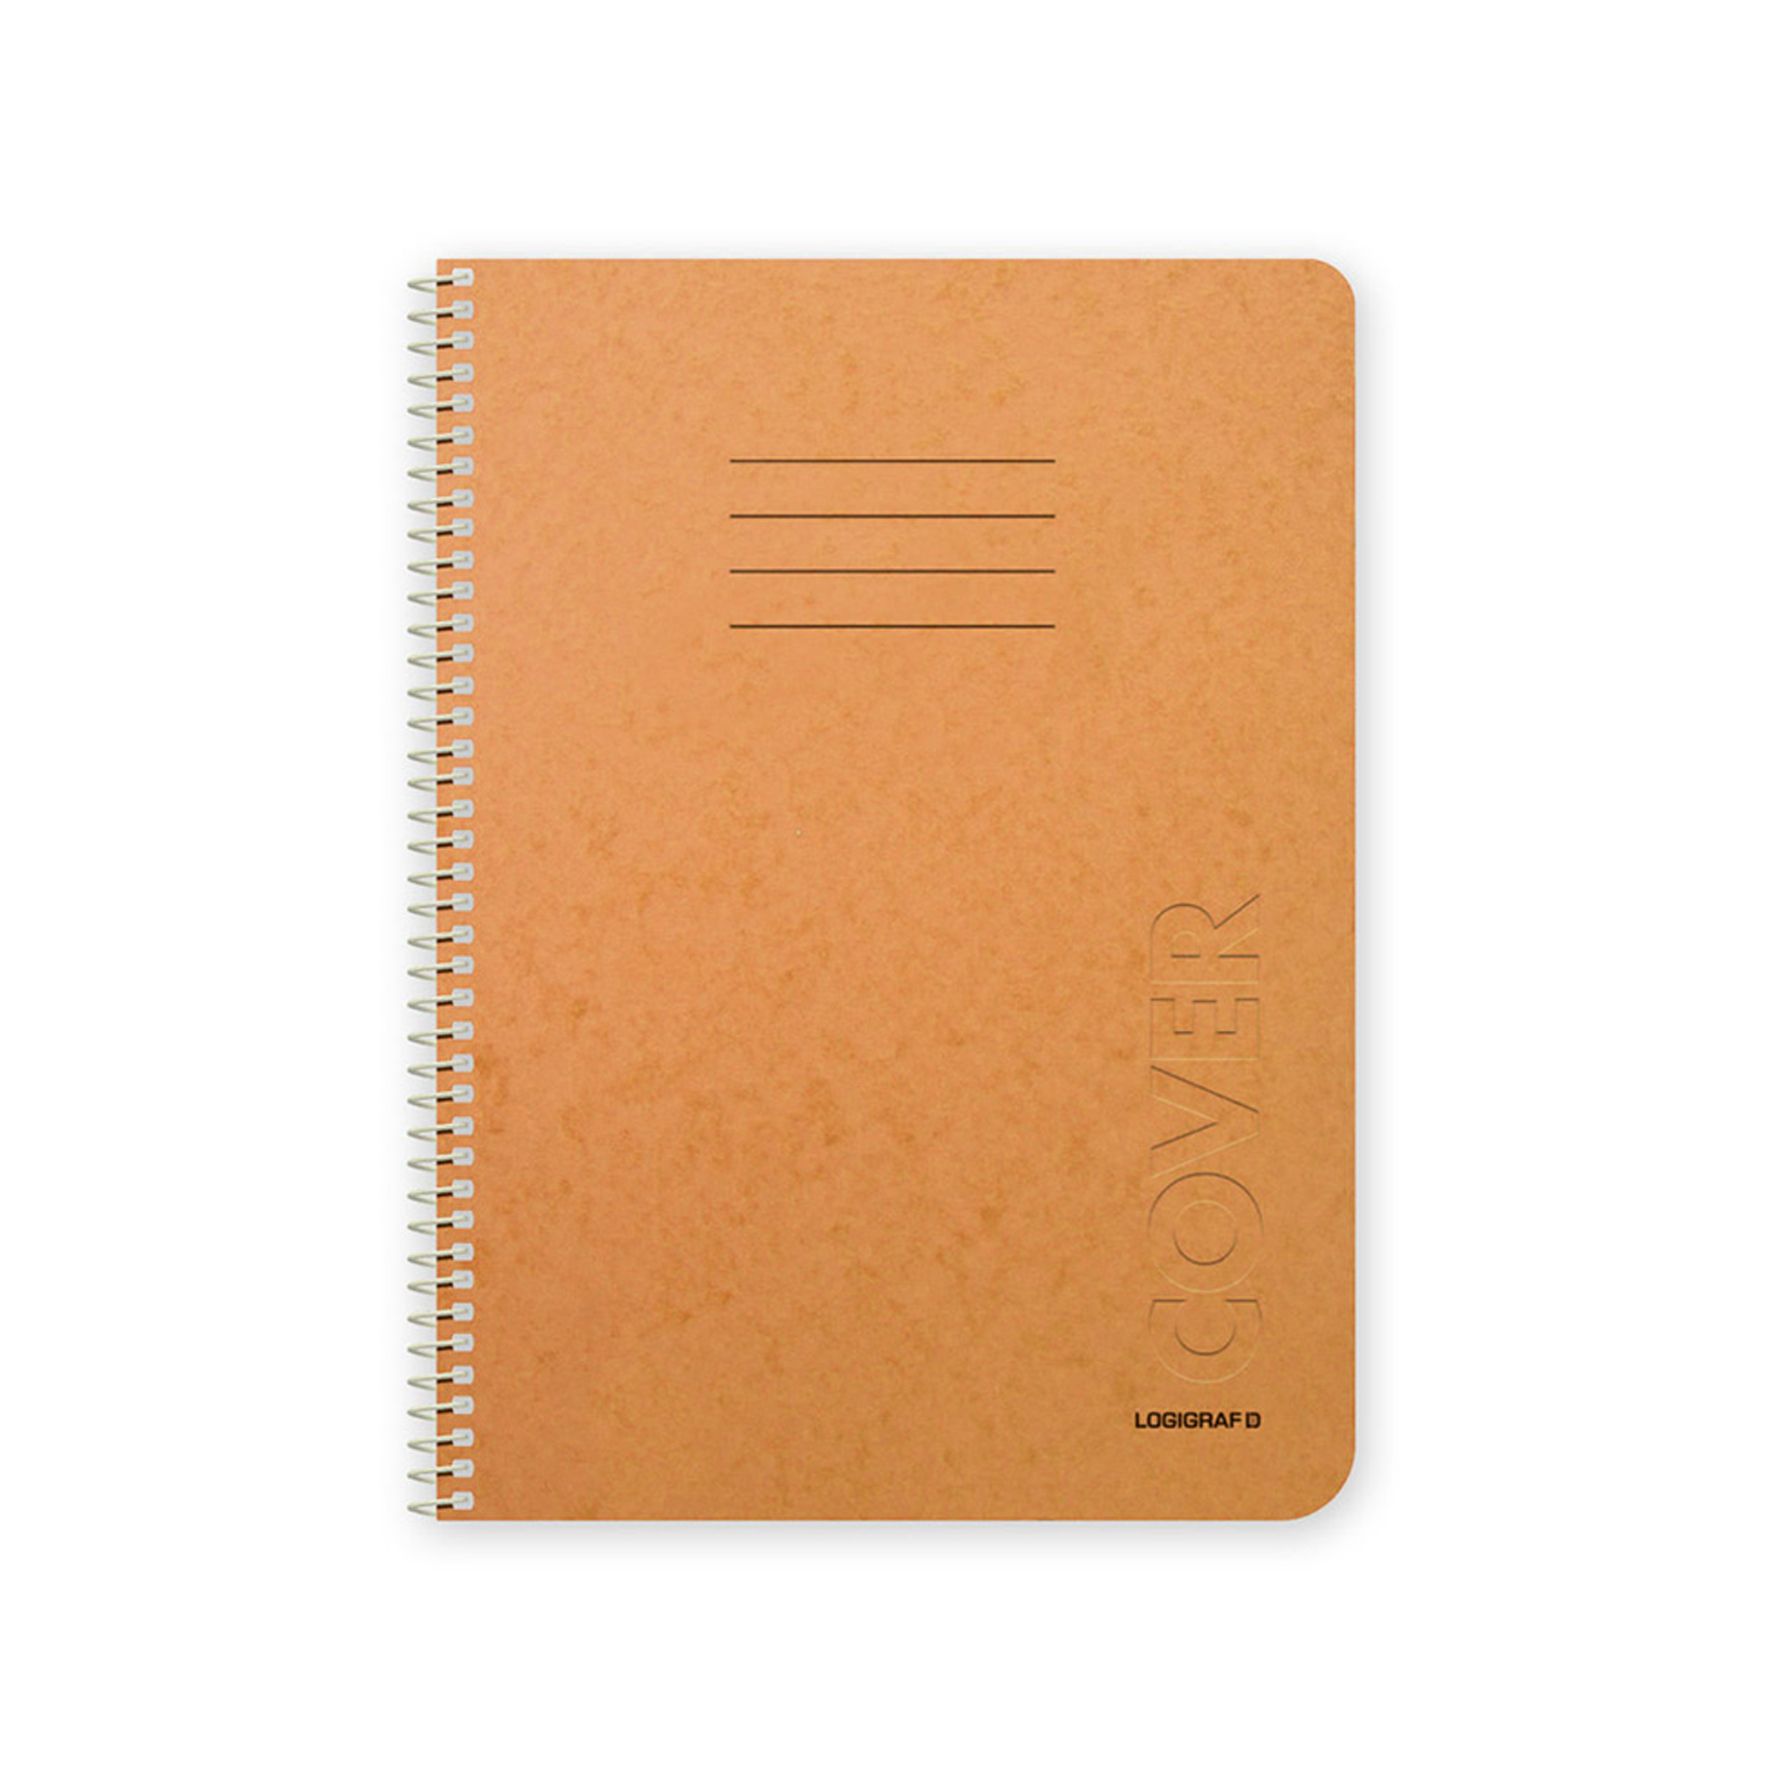 COVER Wirelock Notebook A4/21Χ29 2 Subjects 60 Sheets,11 colors